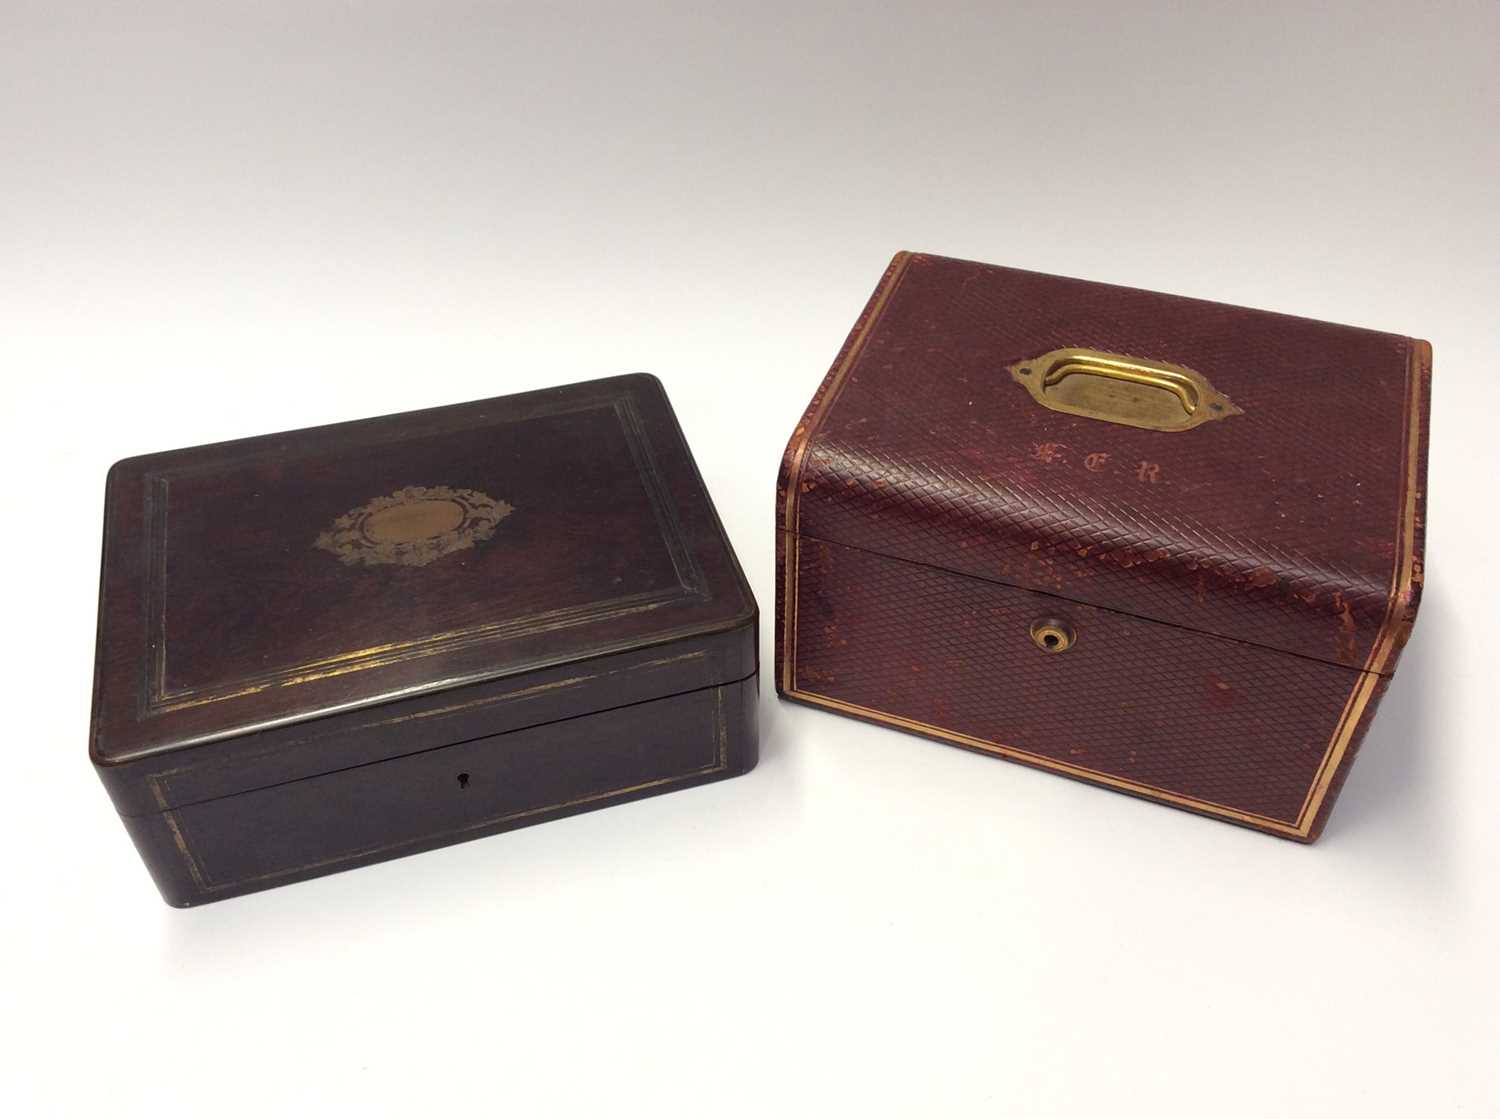 Lot 544 - Victorian rosewood jewellery box with brass inlay decoration and Victorian red leather jewellery box with velvet interior